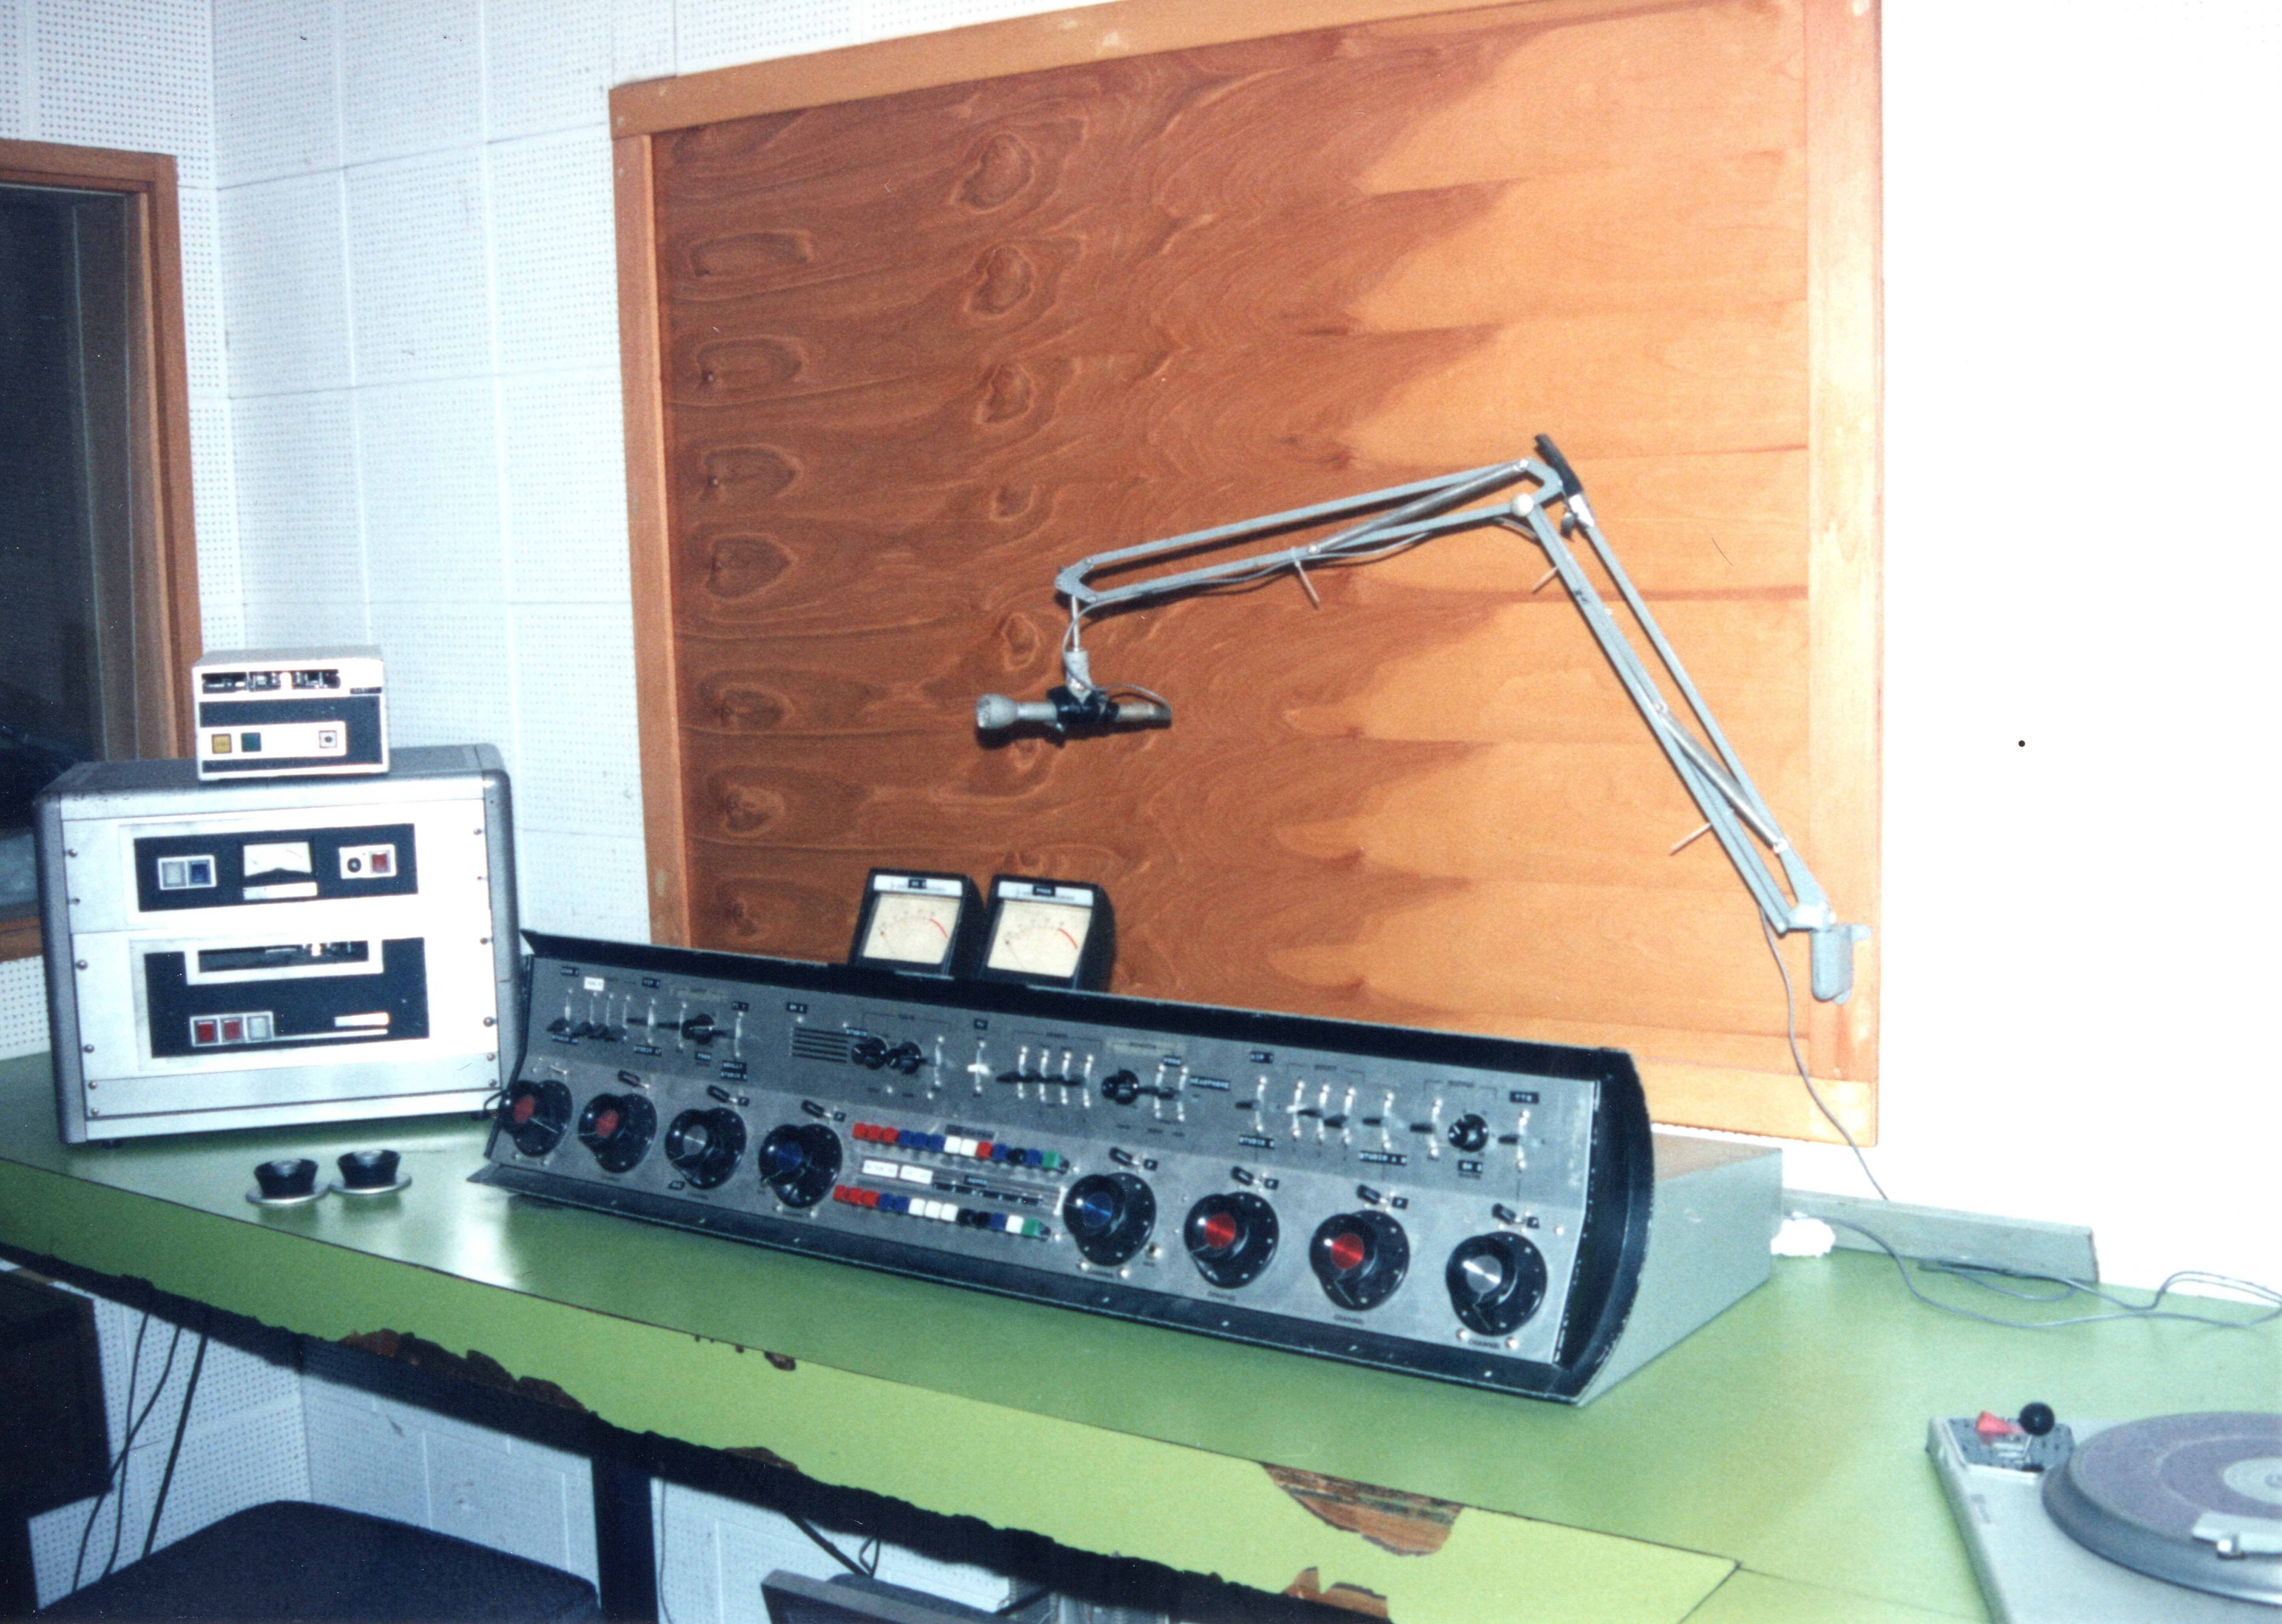 WRSU Studio B - Notice the Wooden panel. This is where the window originally was to look into the VIP Room - Skull and Cross Bones